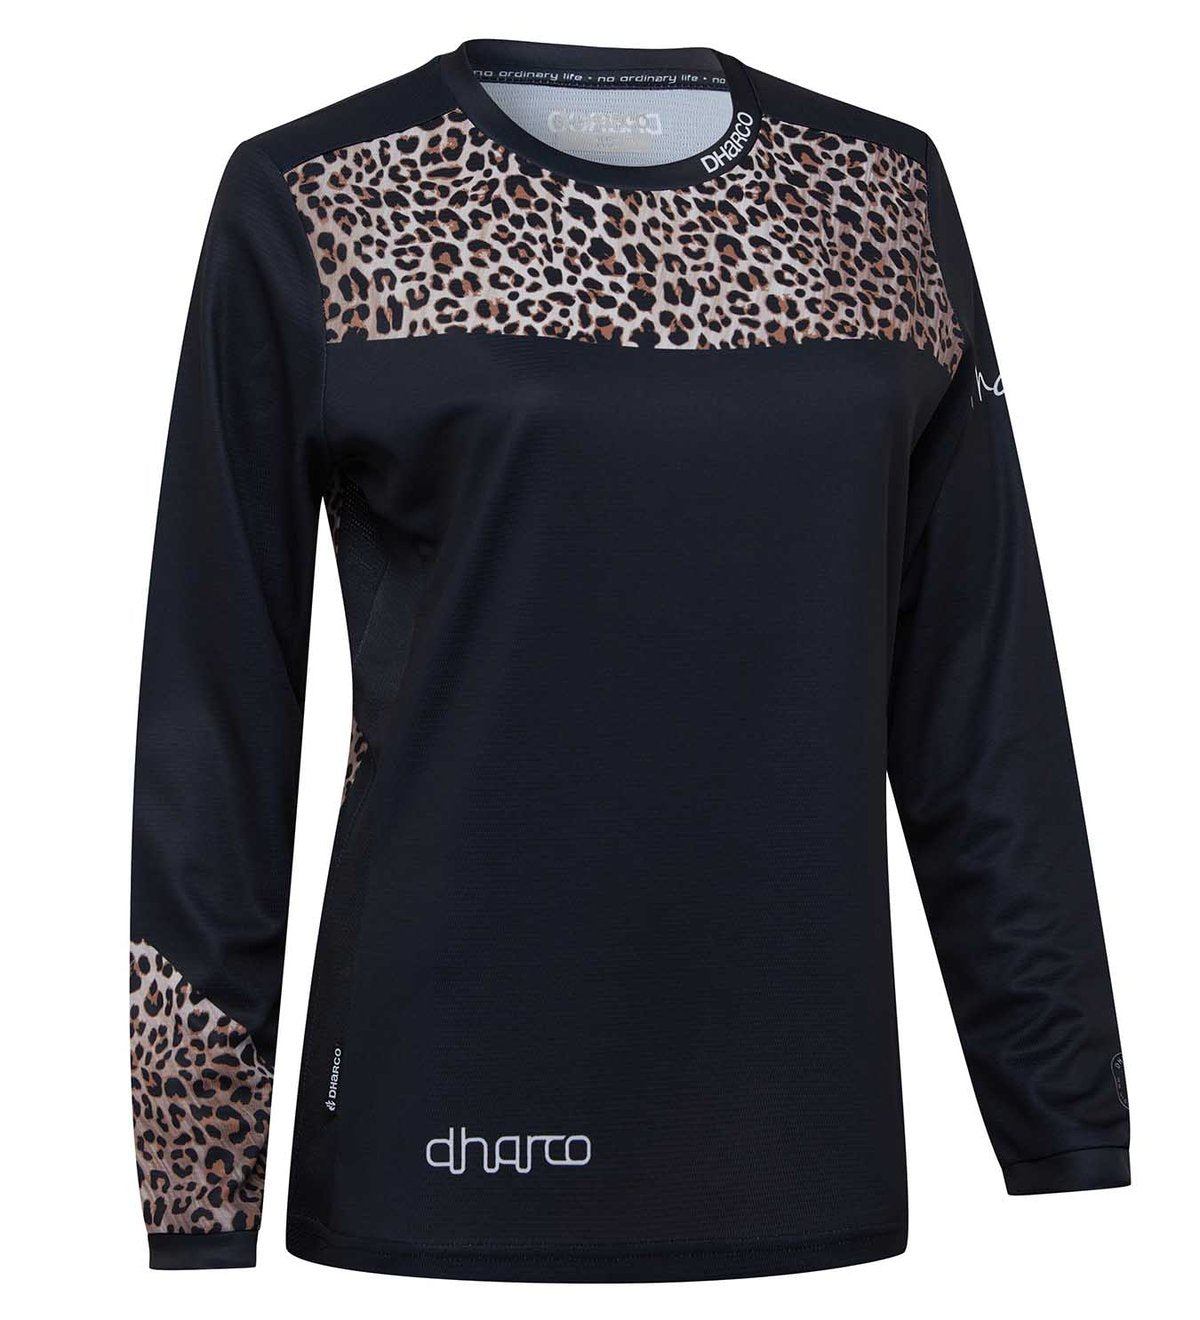 DHaRCO Women's Gravity Jersey, 2020 - Cycle Closet